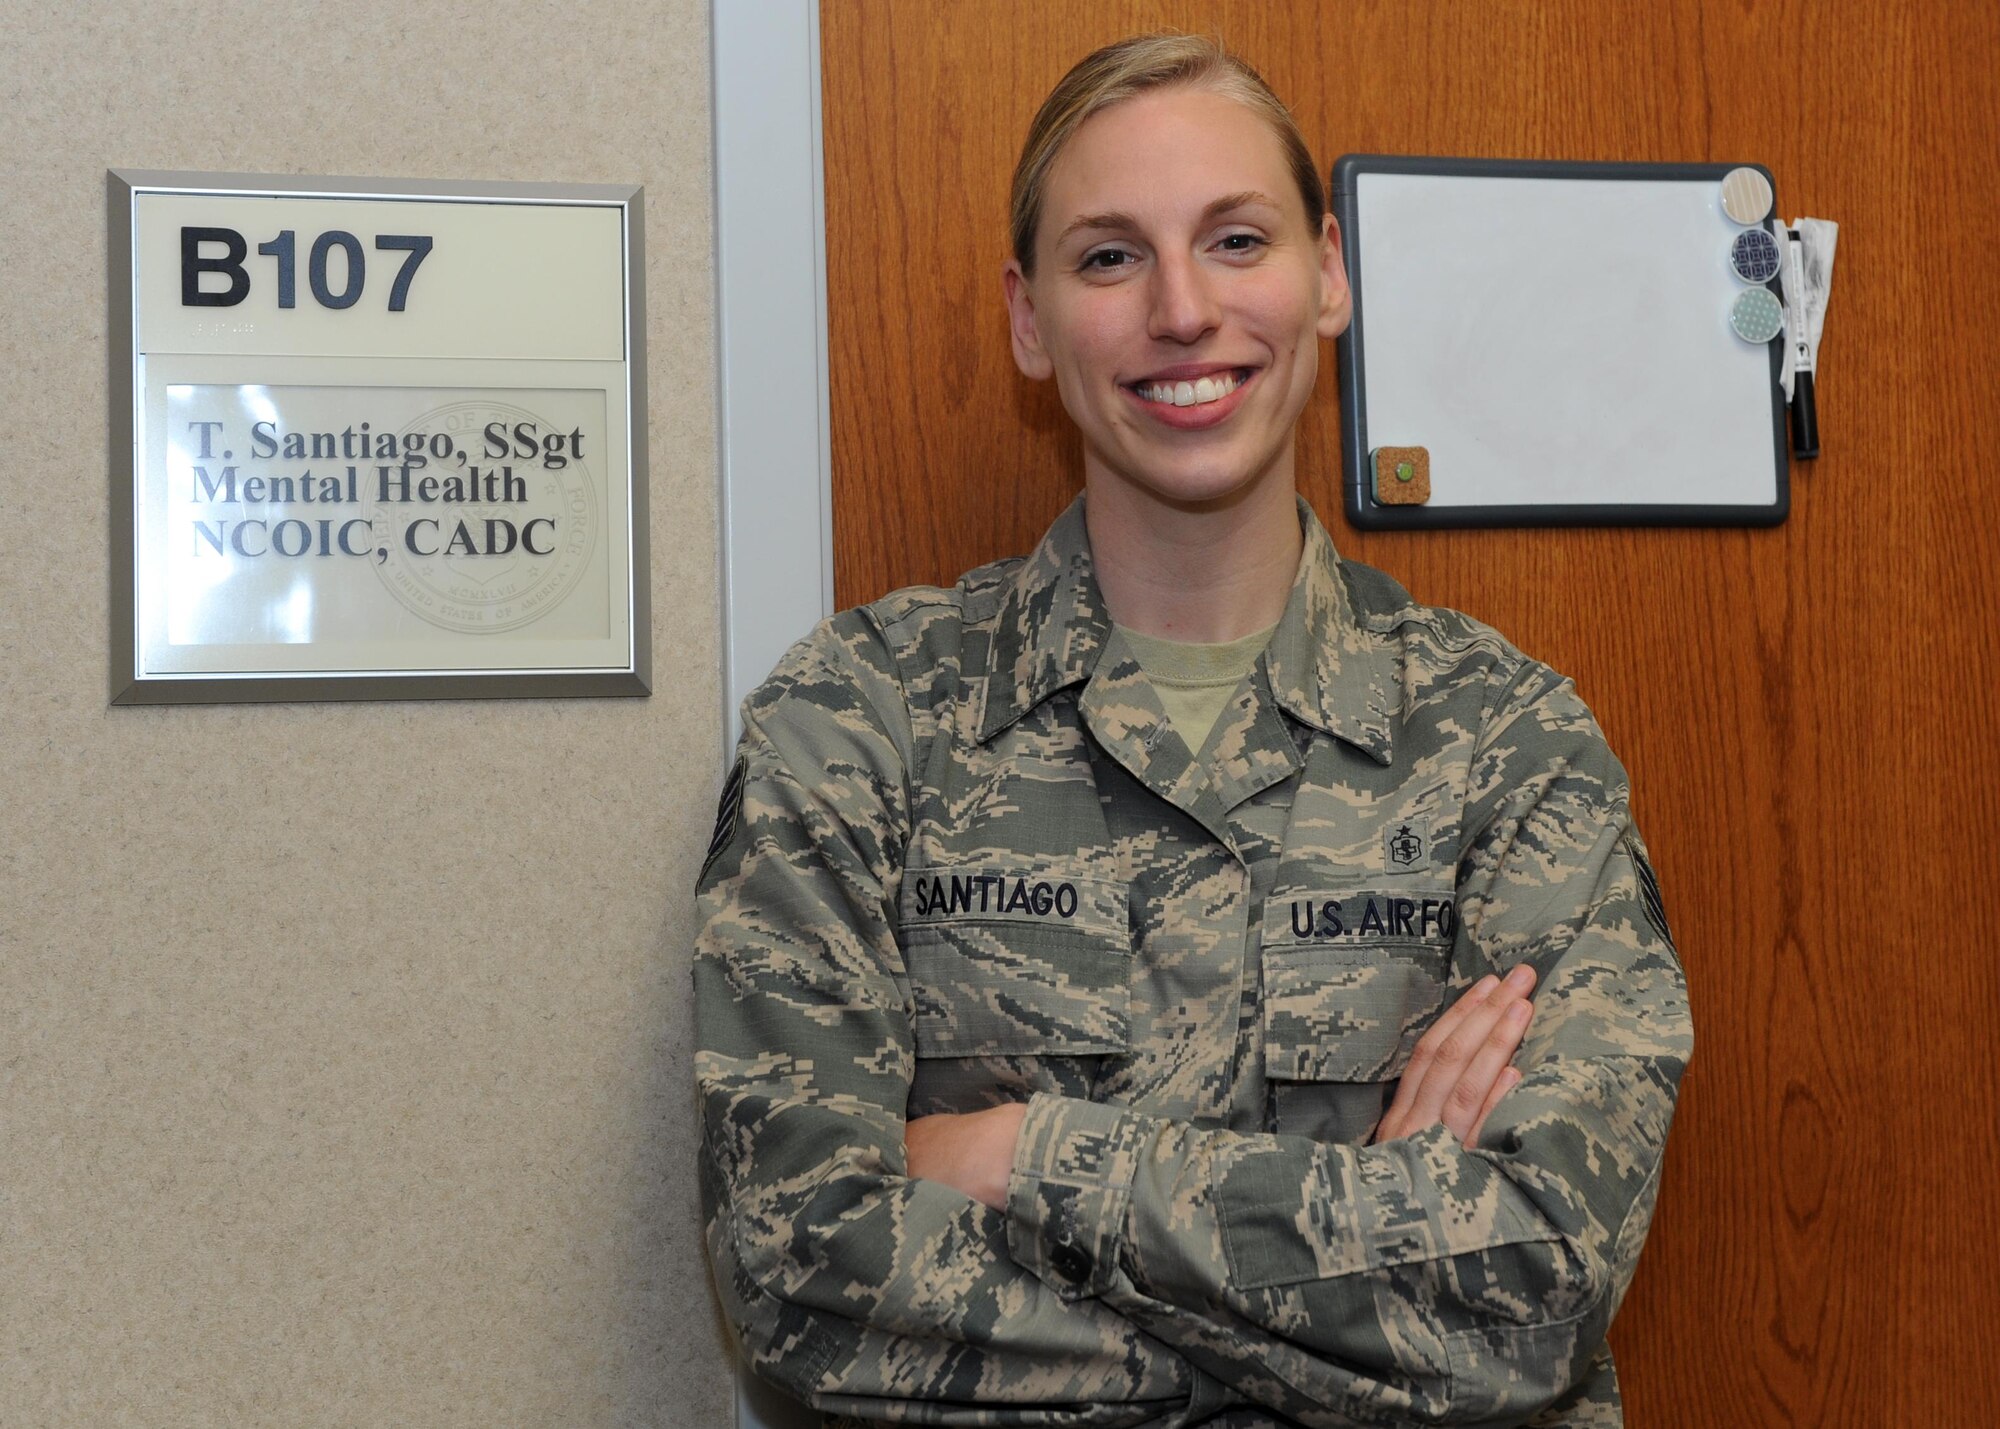 Staff Sgt. Tiffany Santiago is nominated as the Combat Airlifter of the Week September 11, 2017, at Little Rock Air Force Base, Ark. Santiago puts the Air Force’s needs before her own on a daily basis, evidenced by her overseeing the daily operations of the Mental Health Clinic, delivering 9,900 appointments worth $510,000 to patients from three military branches. (U.S. Air Force photo by Airman 1st Class Grace Nichols)